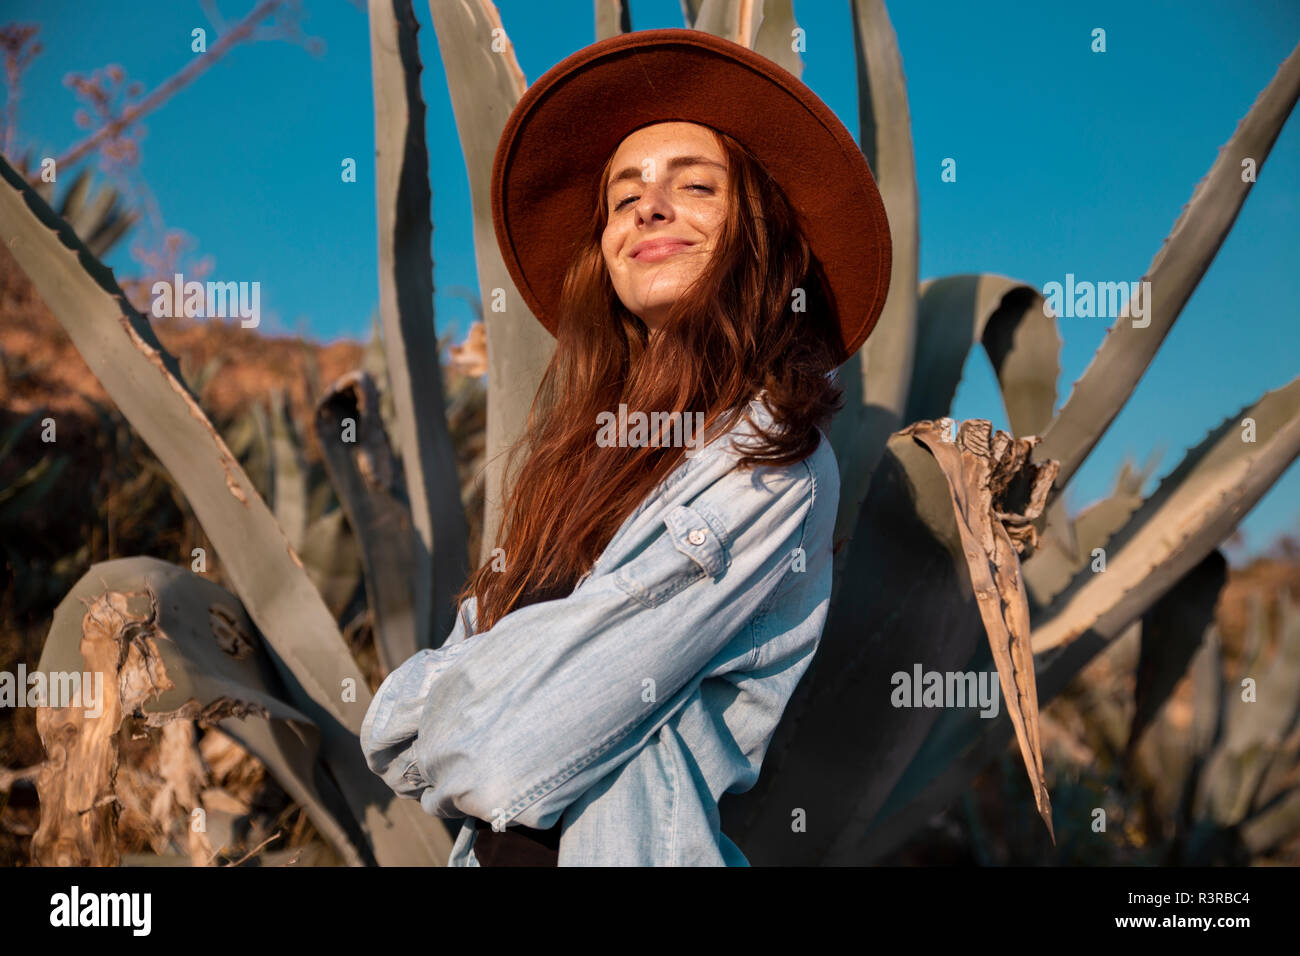 Smiling young woman wearing a hat at an agave in the countyside Stock Photo